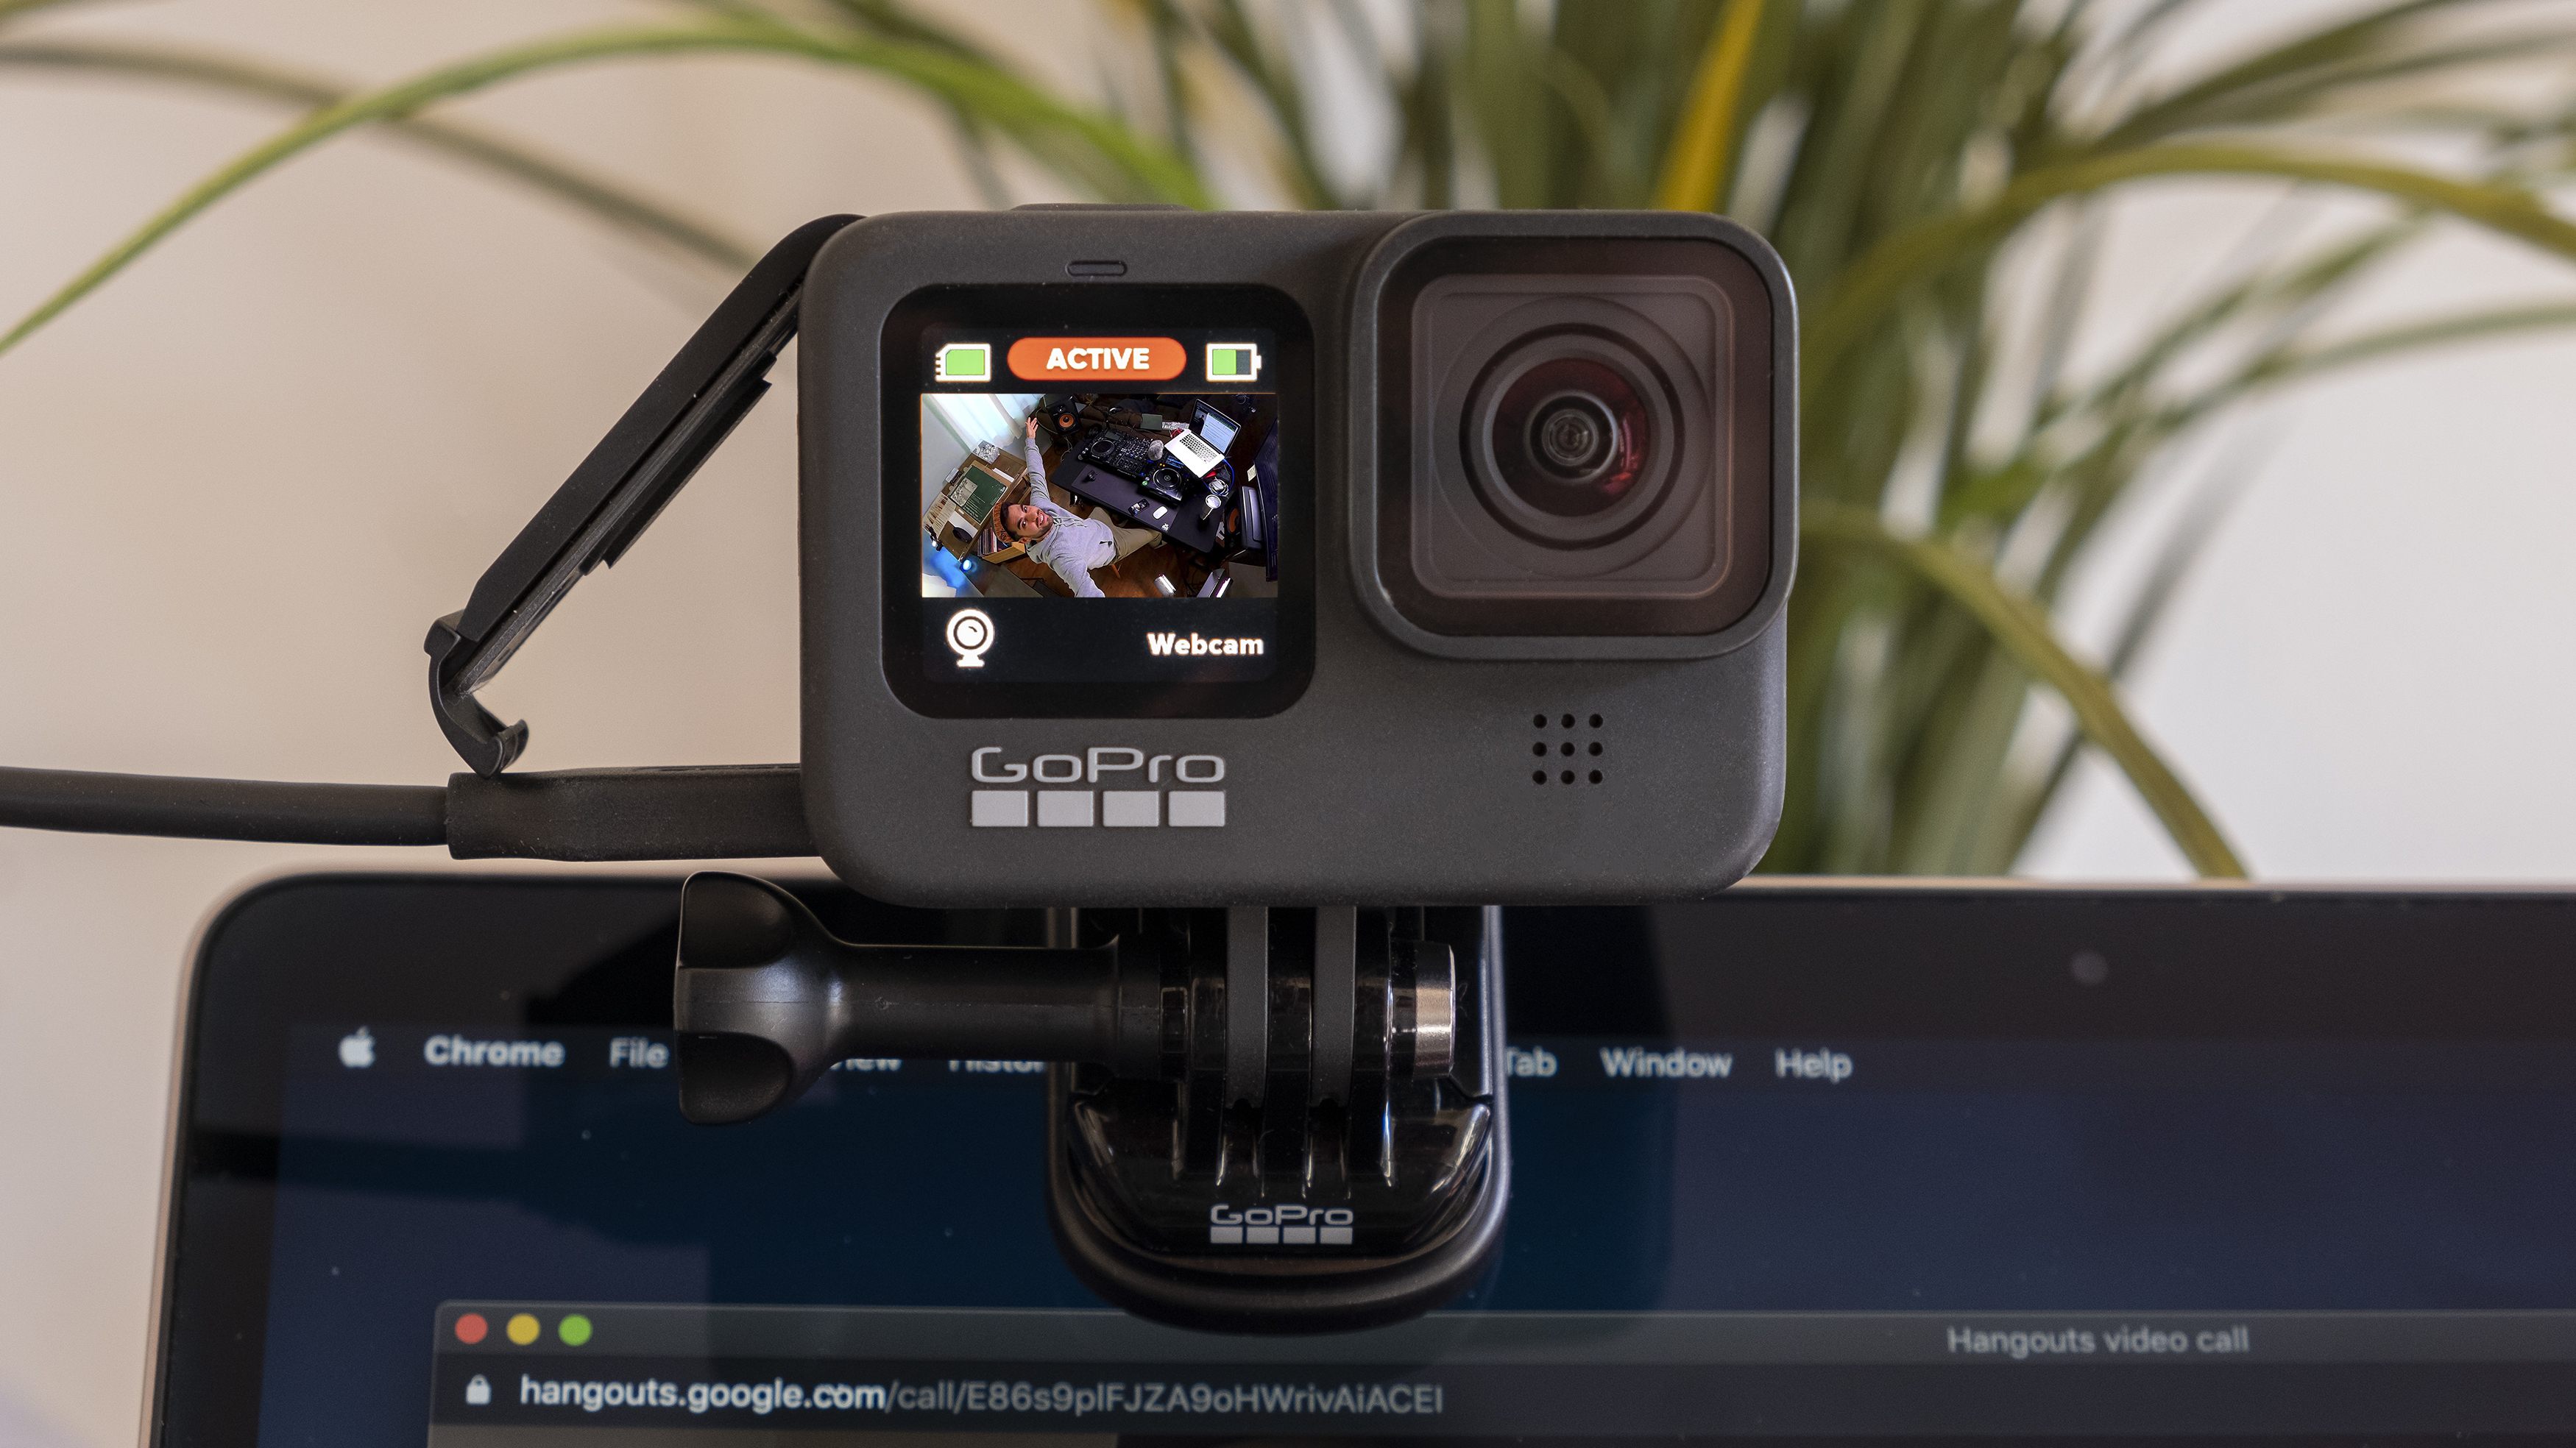 Download gopro webcam app windows 12th new maths guide pdf free download